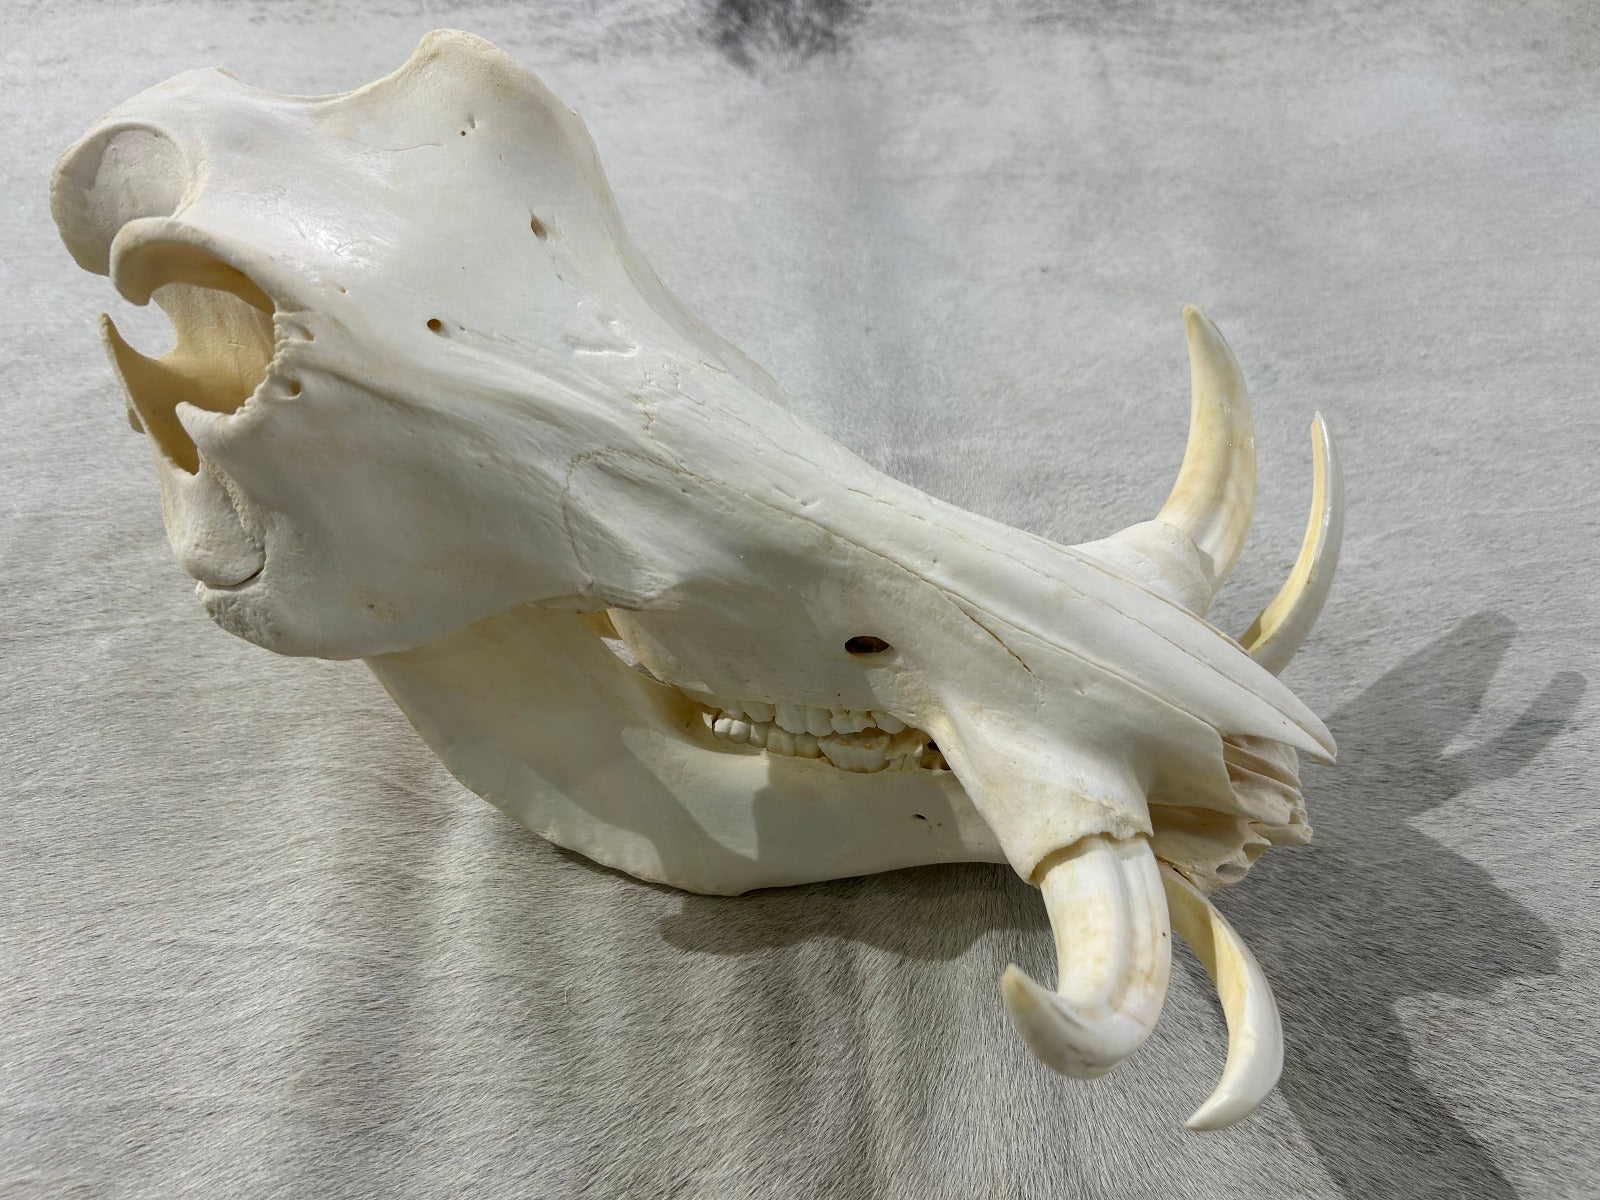 African Pig Skull - Real Wild Pig Polished Cranium - Approximate Size: About 15" long X 11" wide X 8" deep